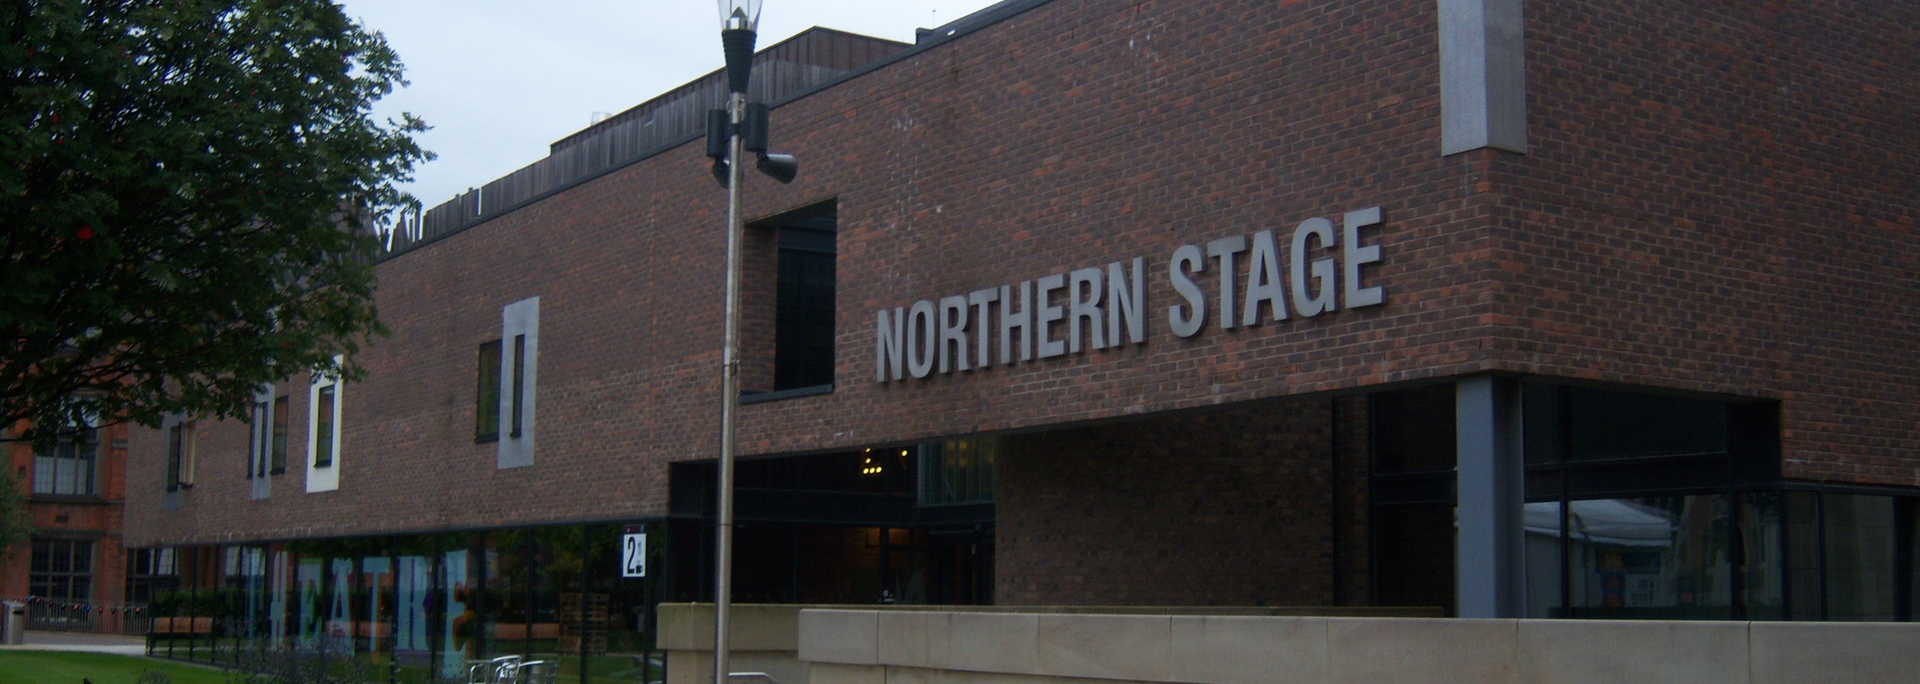 Picture of the Northern Stage at Newcastle University
